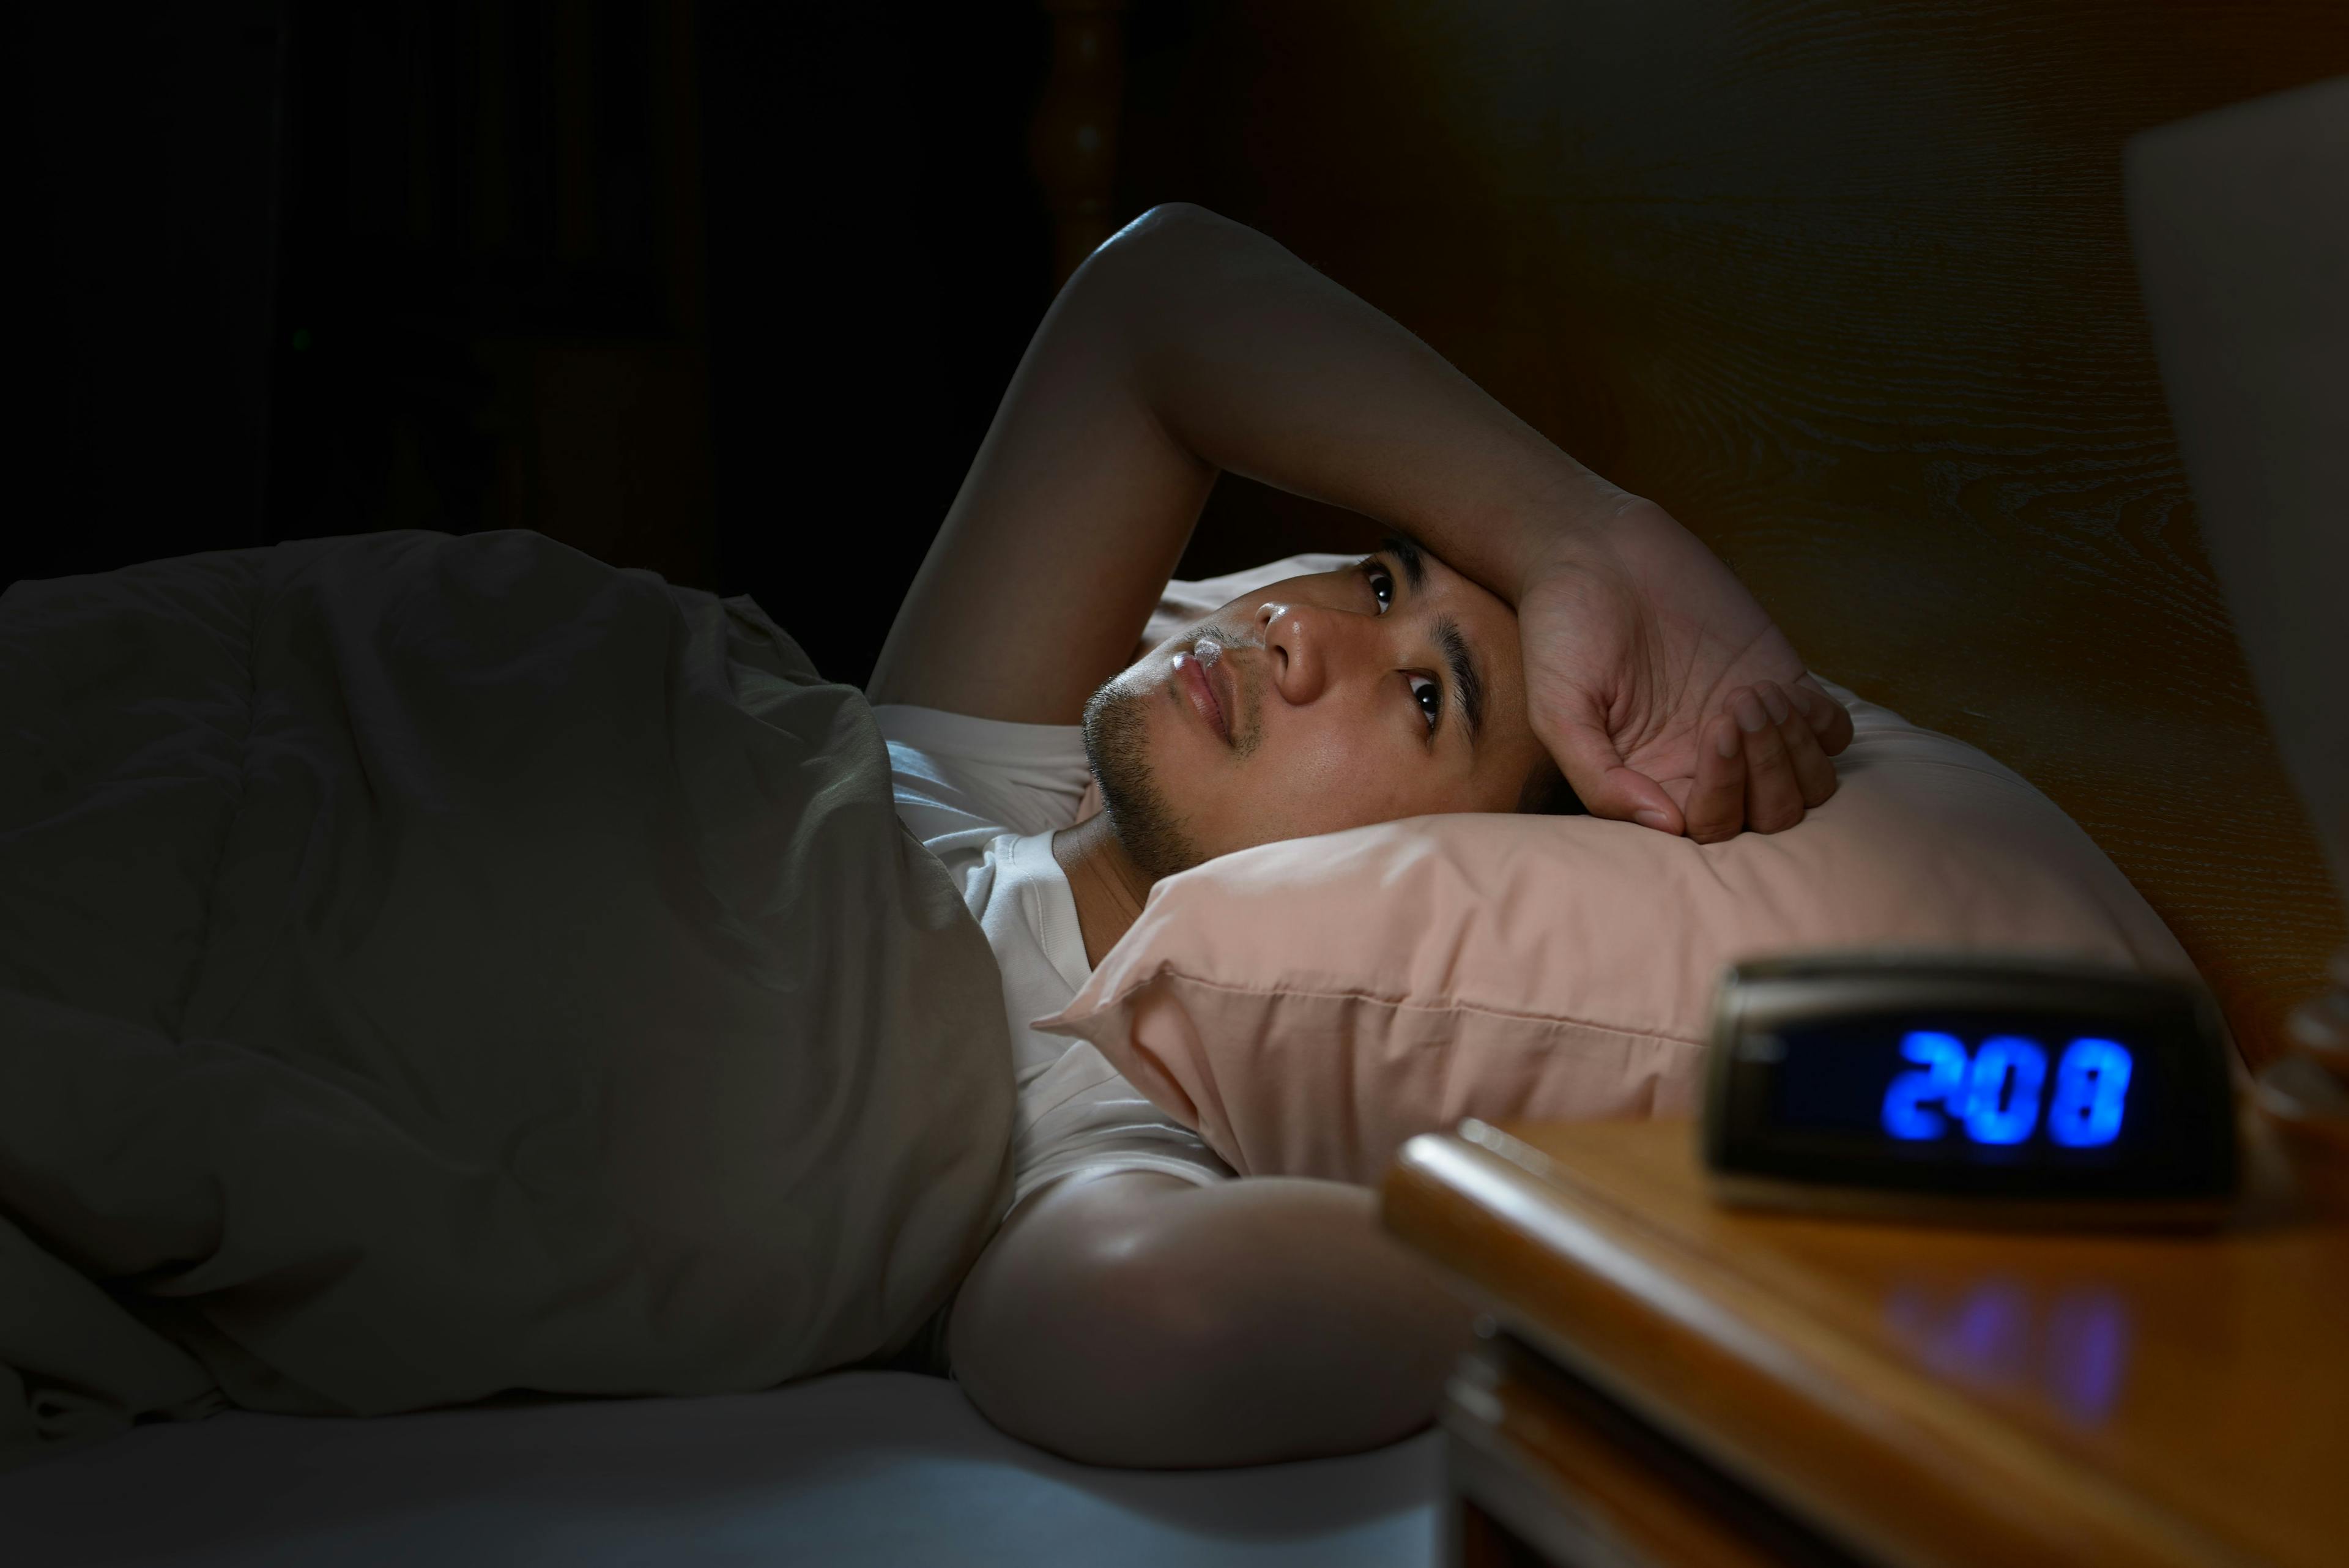 Depressed man suffering from insomnia lying in bed | Image Credit: amenic181 - stock.adobe.com